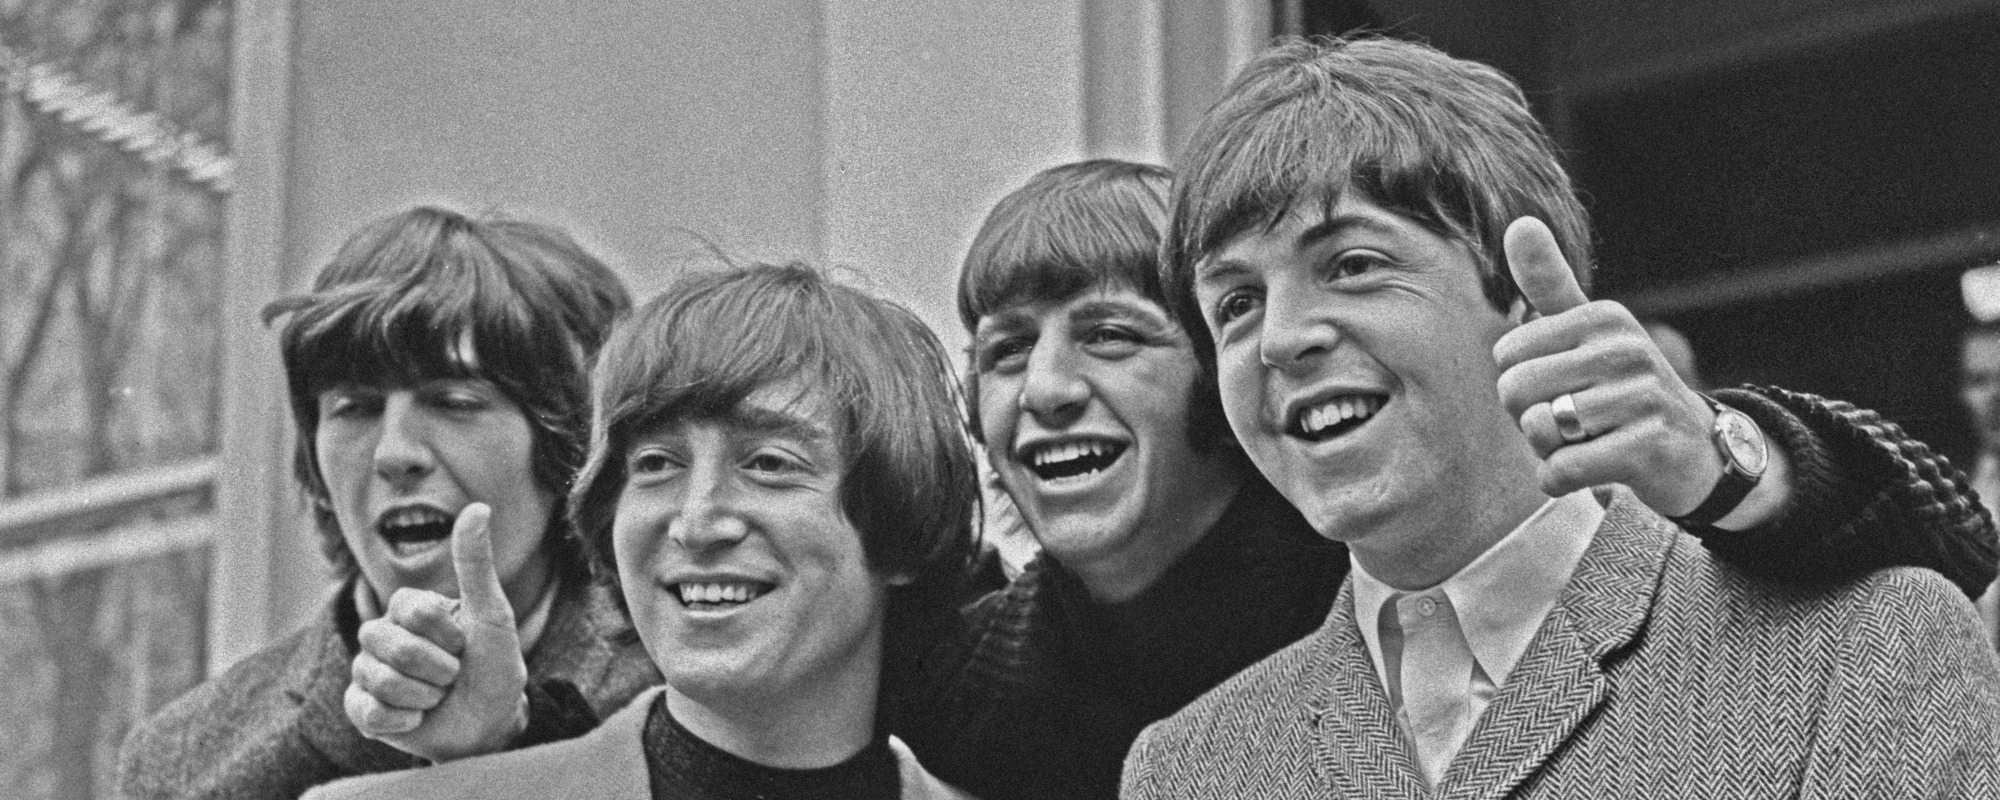 The Story Behind “Please Please Me” by The Beatles and How a Snowstorm Helped Propel It to the Top of the Charts